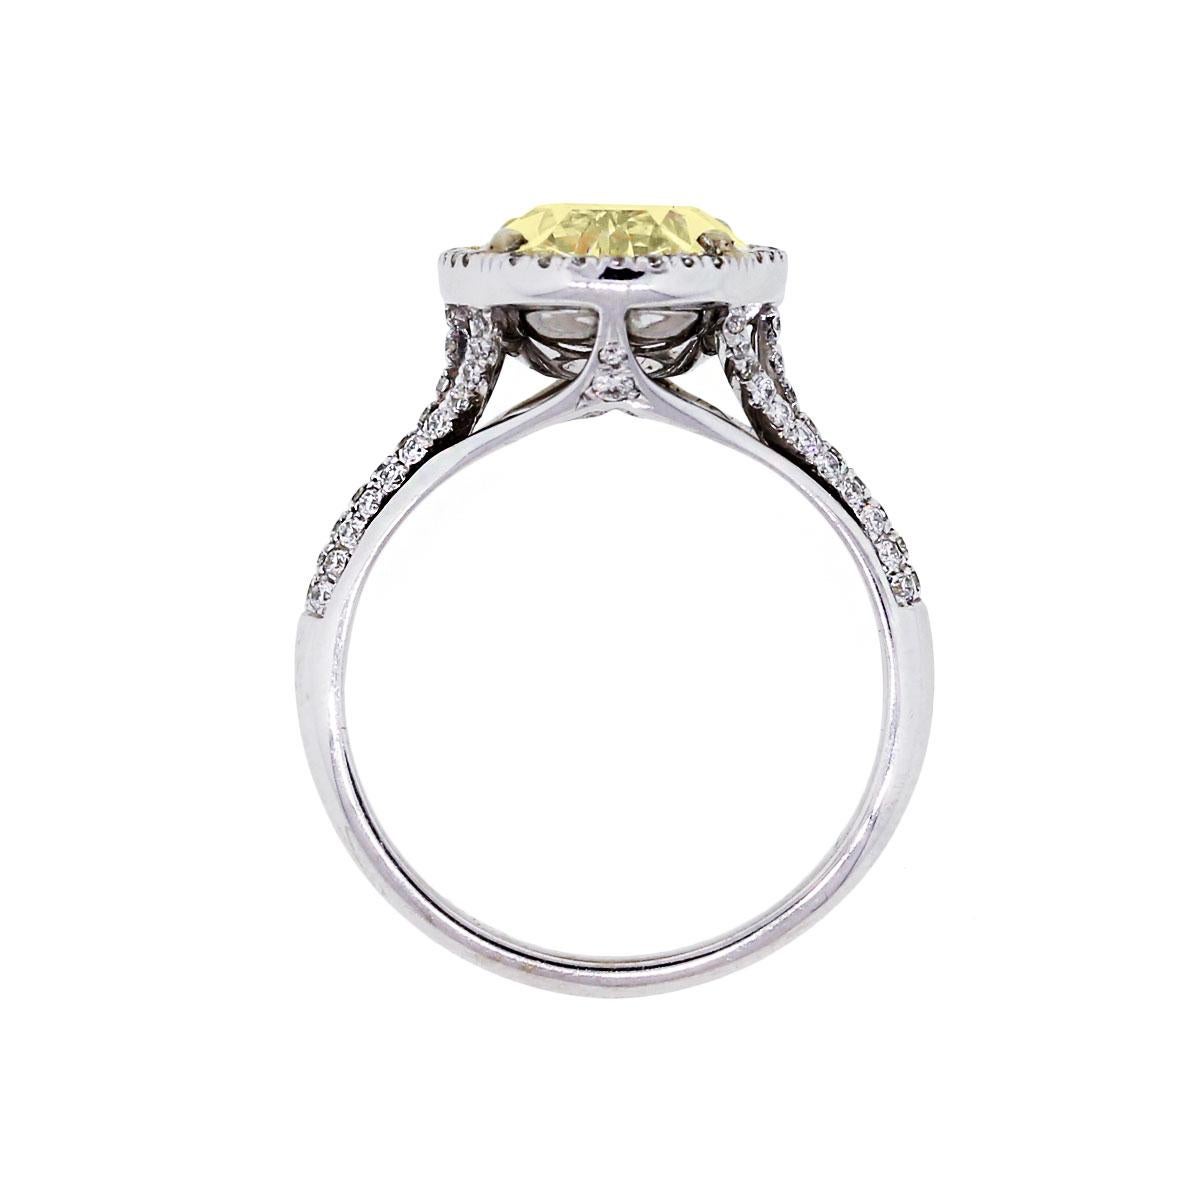 Material: 14k white gold
Diamond Details: 6.34ct Fancy Yellow Oval Cut center diamond
Side Diamond Details: Approximately 1ctw of round brilliant diamonds. Diamonds are G in color and VS2 in clarity
Size: 7.5 (can be sized)
Total Weight: 5.9g